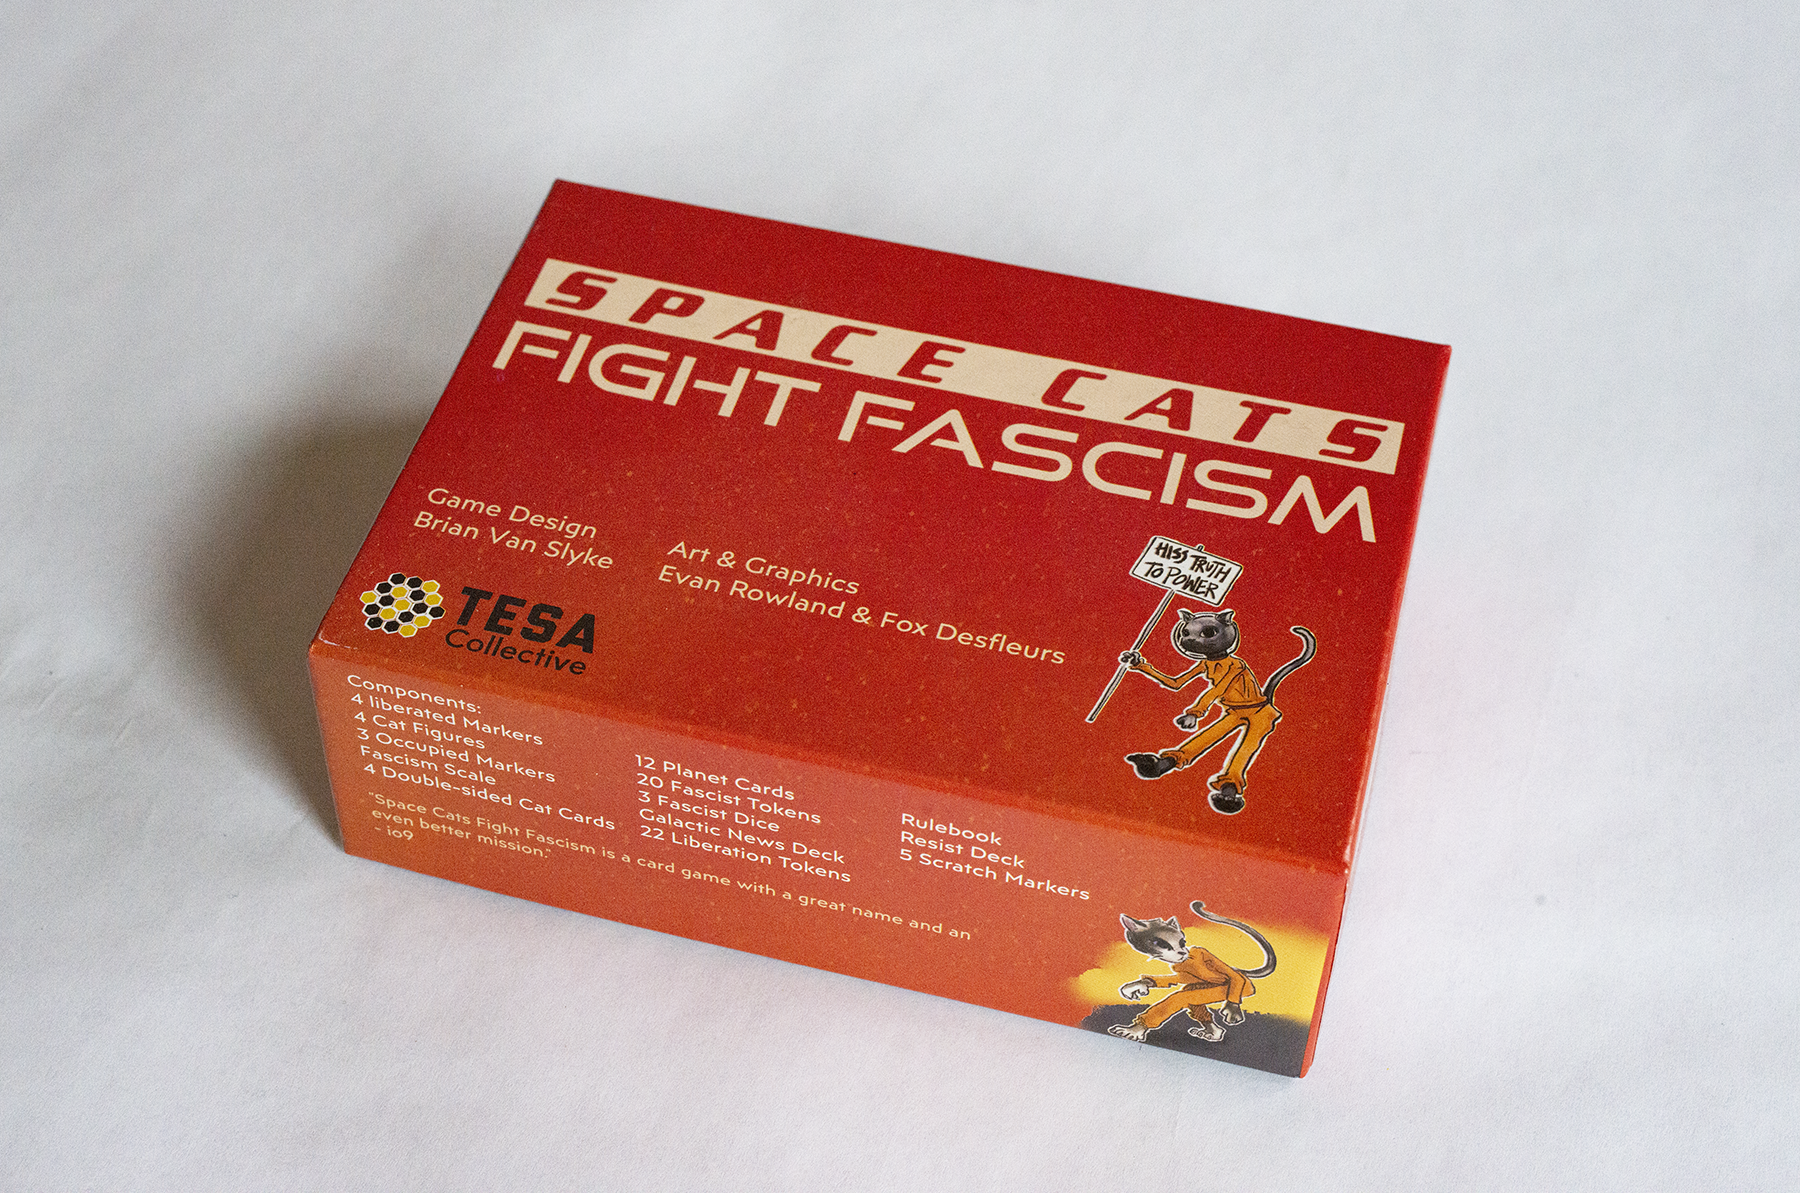 Space Cats Fight Fascism: The Board Game